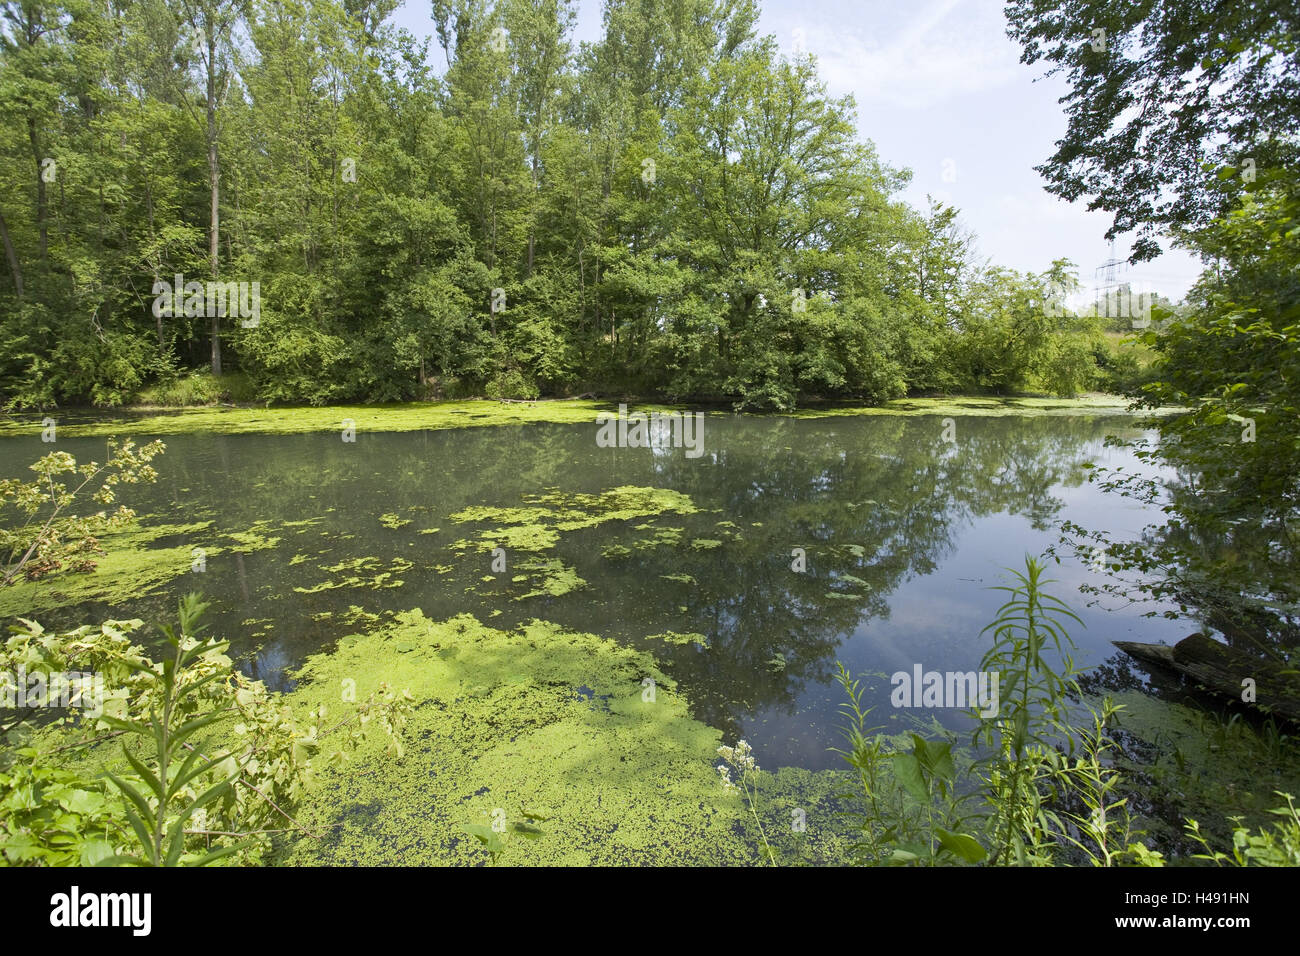 Germany, nature reserve, meadow wood, lake, water plants, Stock Photo